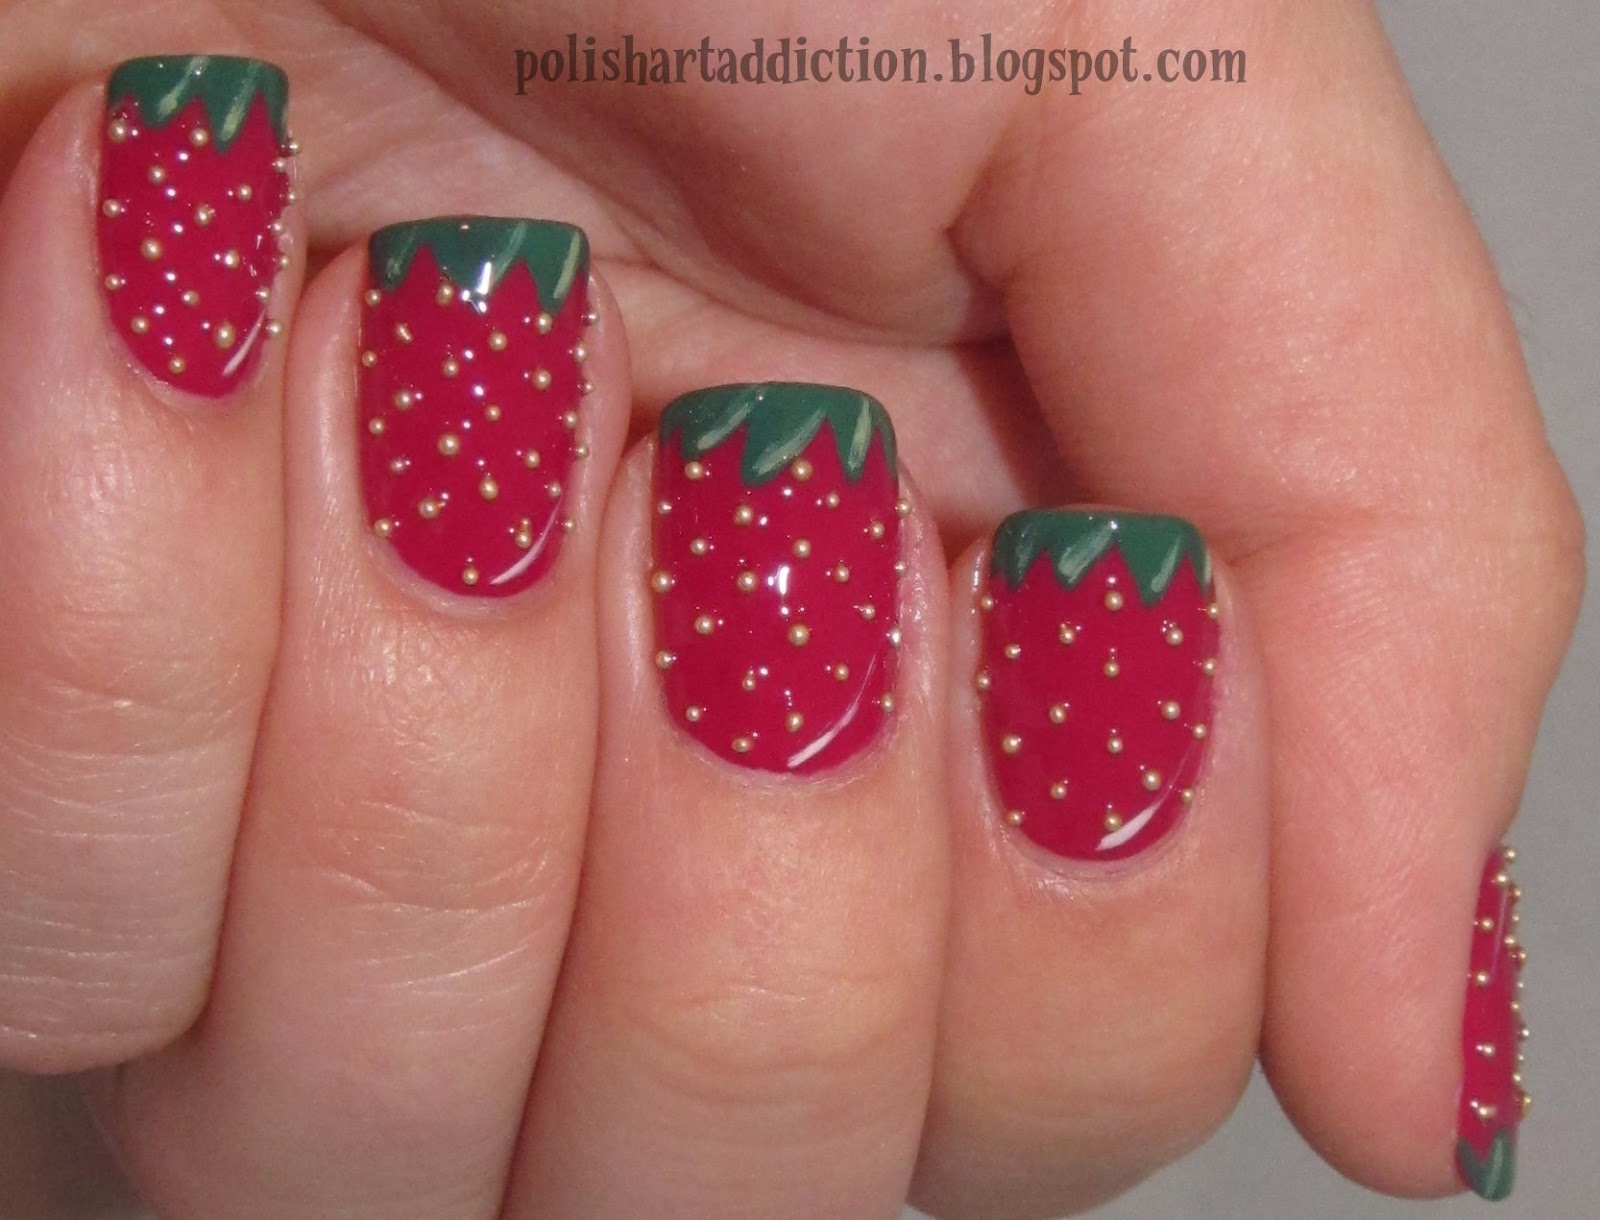 2. Strawberry Nail Art Step by Step - wide 9